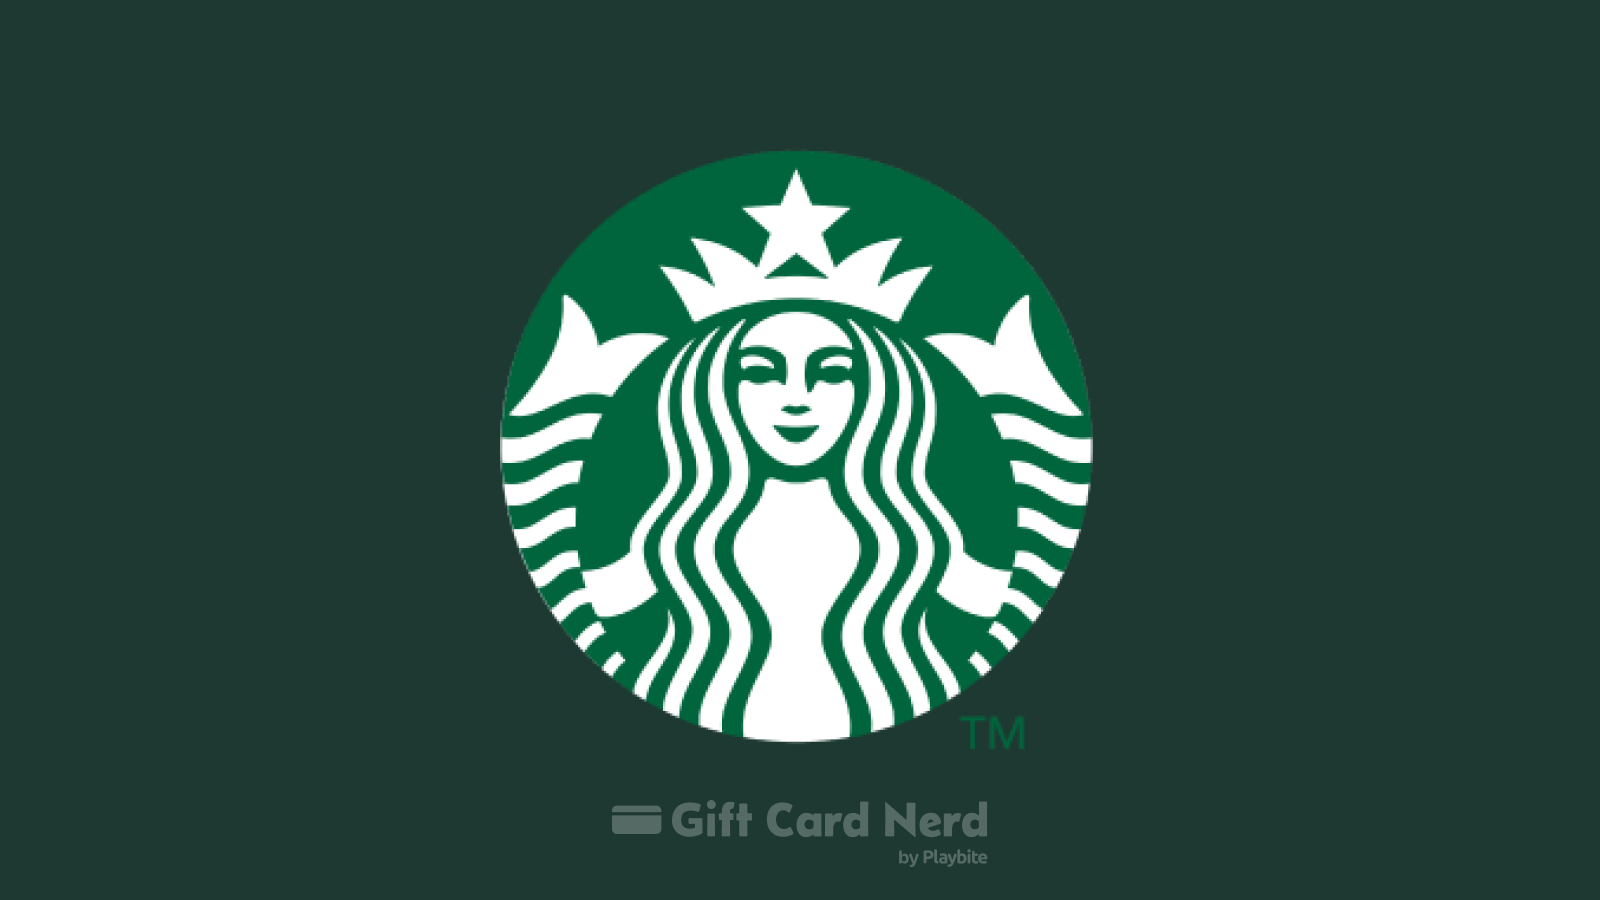 Can I Use a Starbucks Gift Card on Postmates?